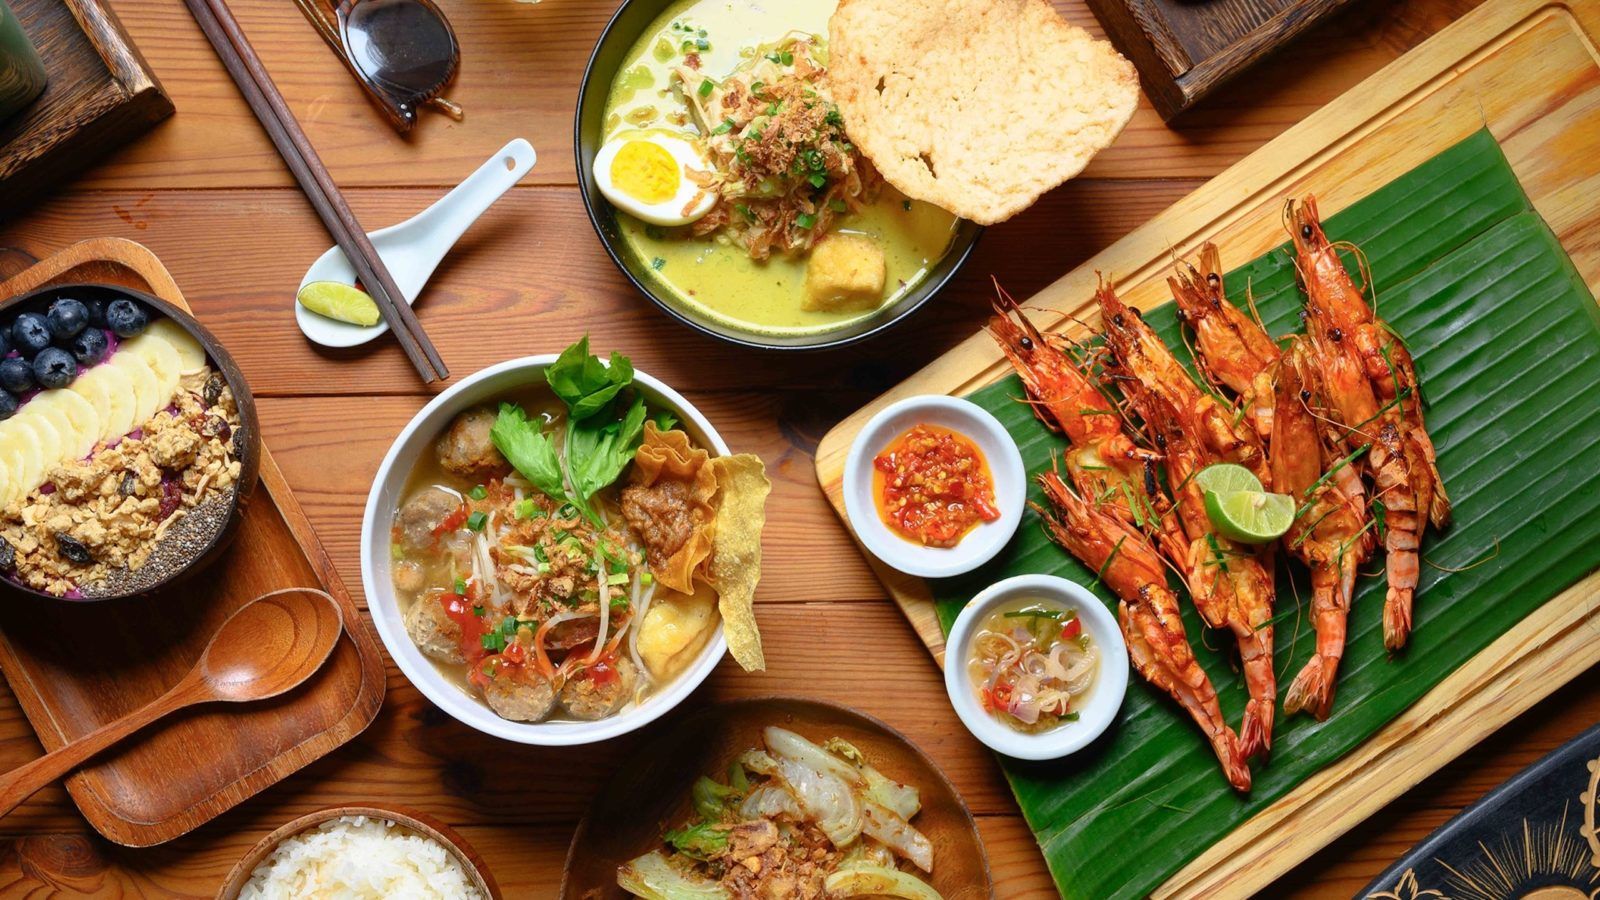 Your guide to the best restaurants in Sai Kung